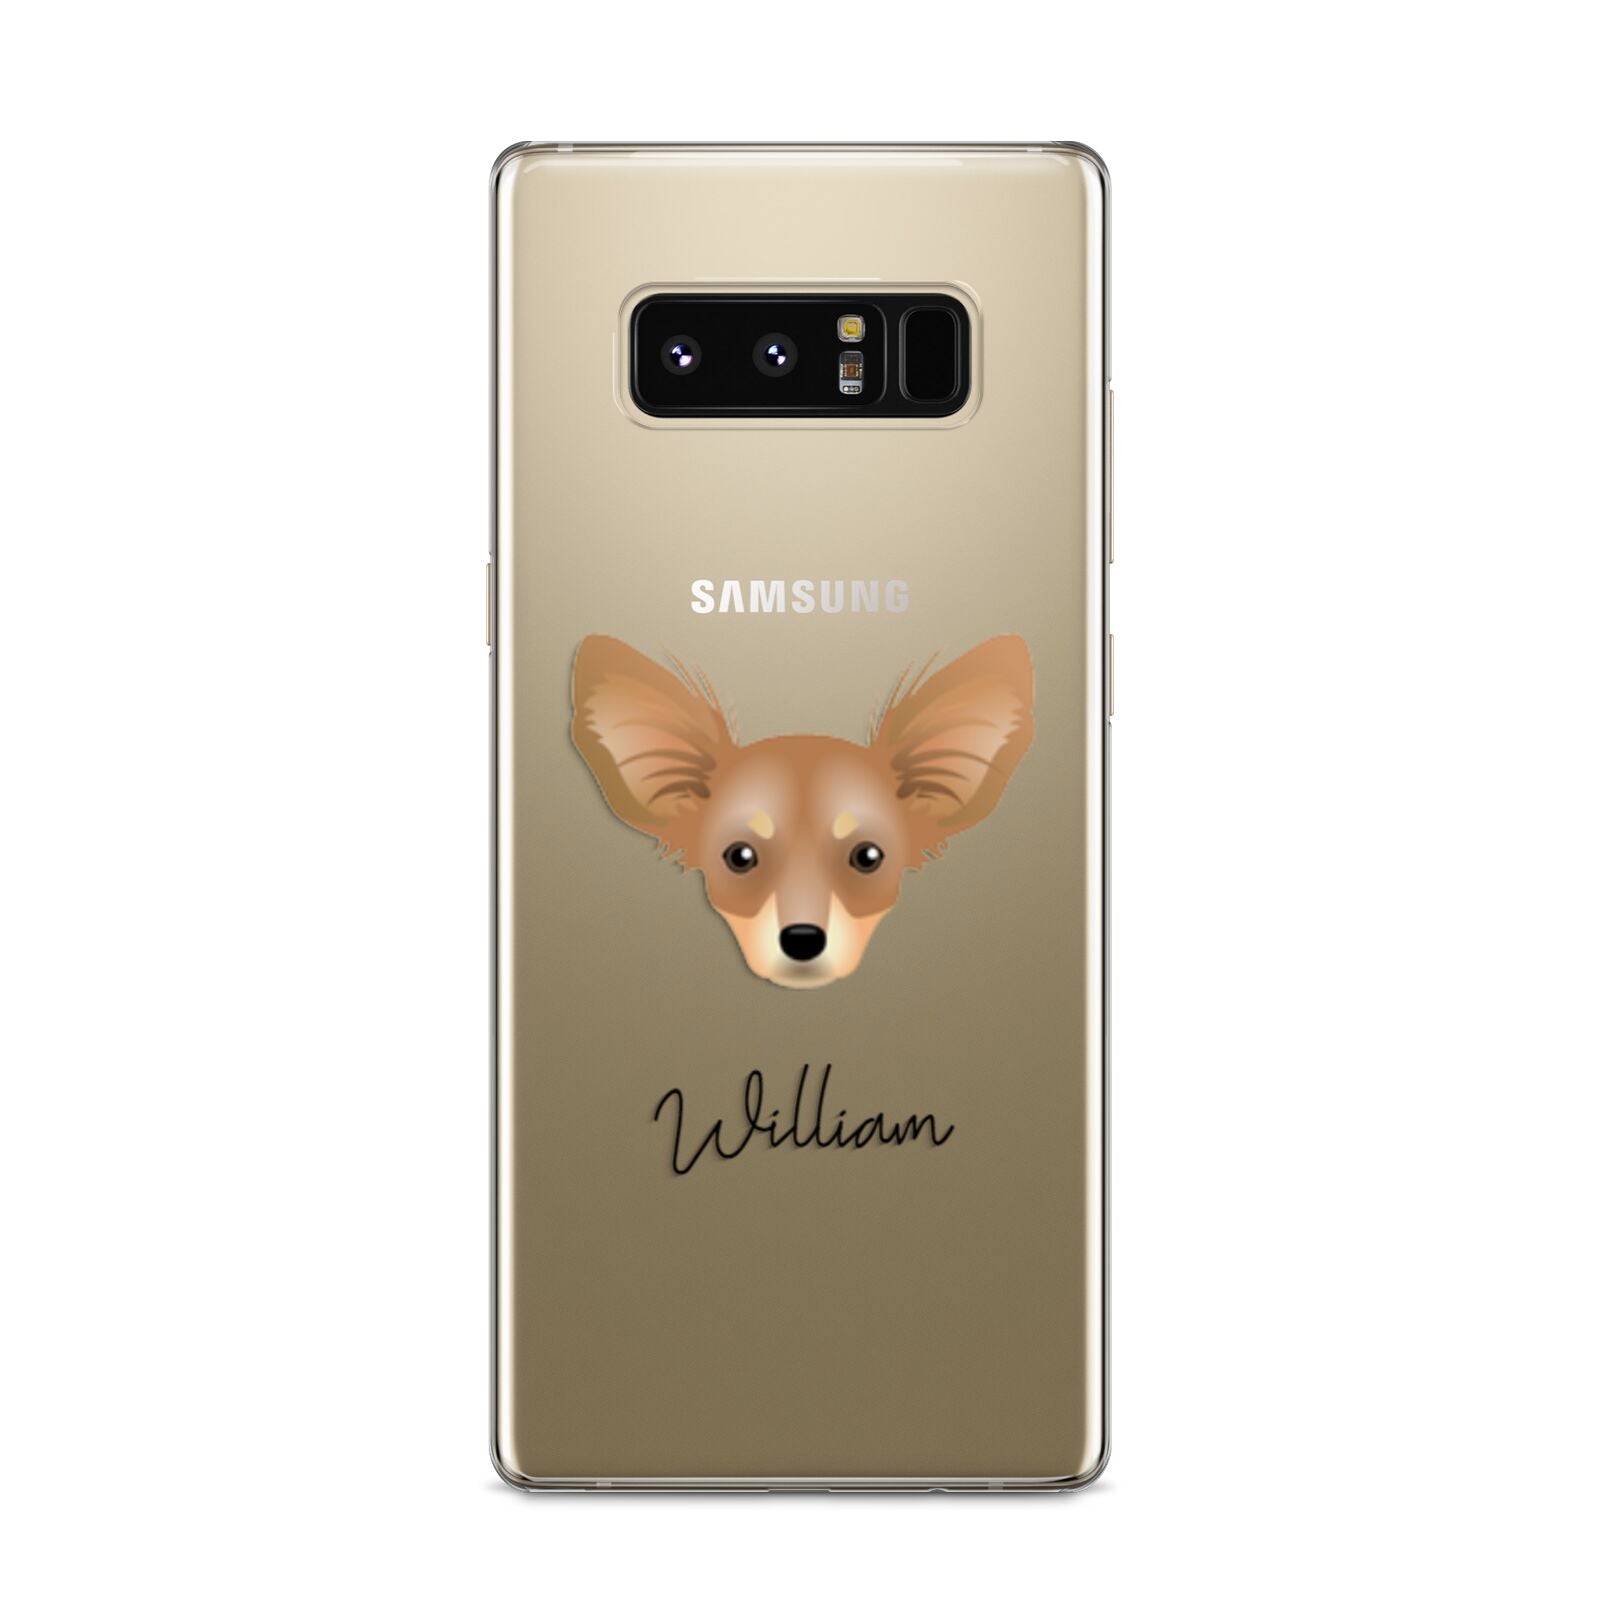 Russian Toy Personalised Samsung Galaxy S8 Case